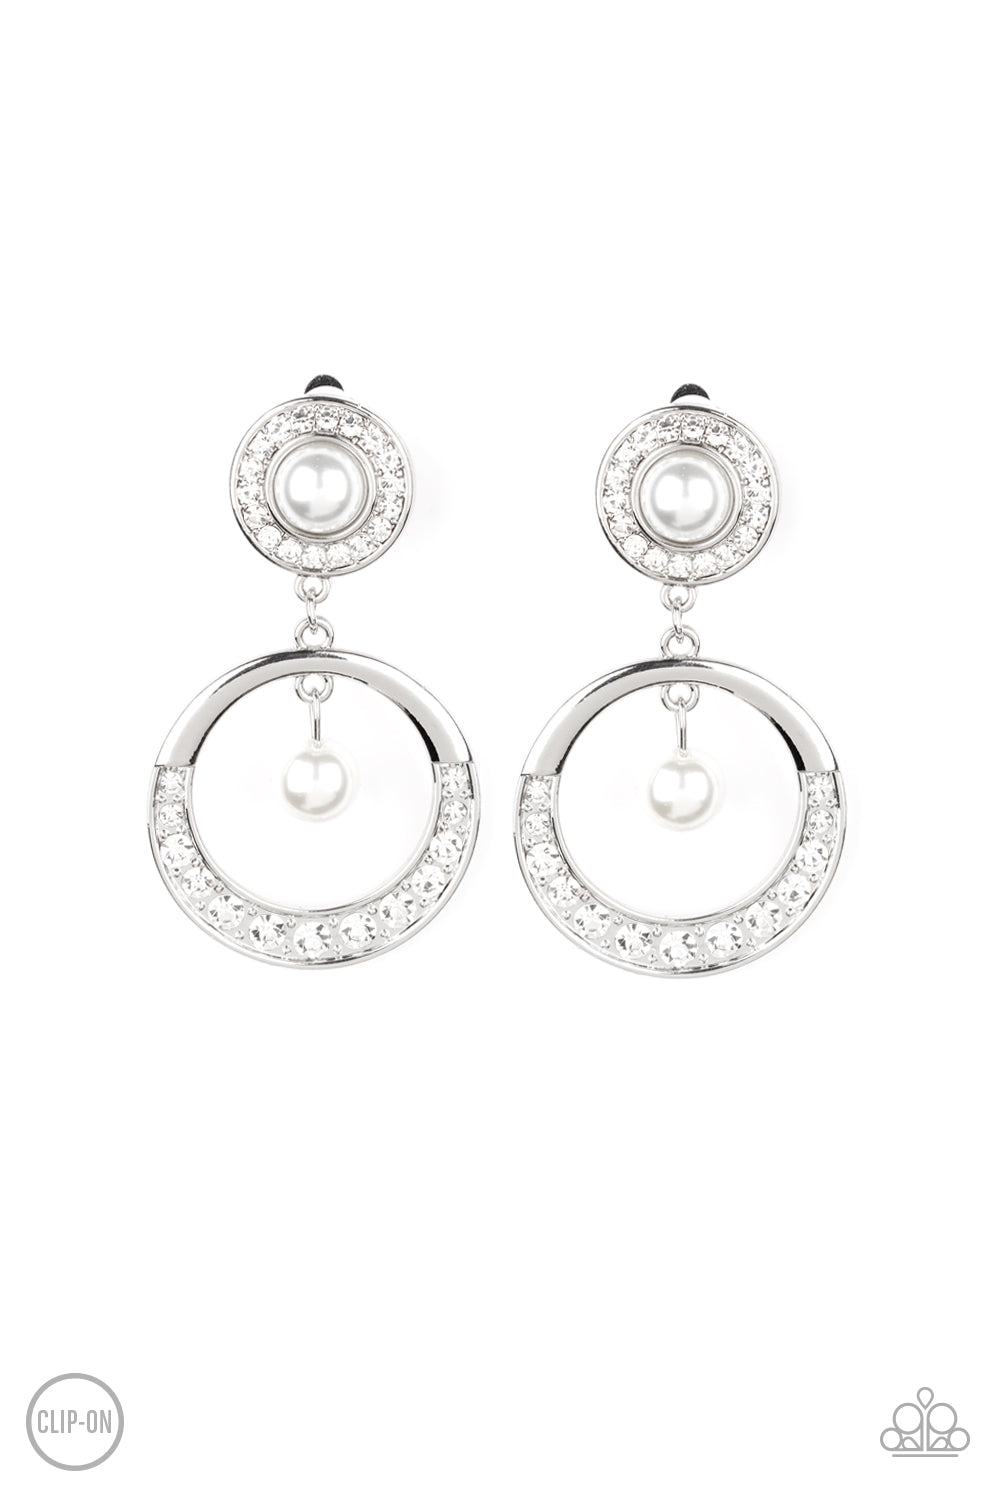 Royal Revival - White - Paparazzi Pearl Earrings Paparazzi jewelry images